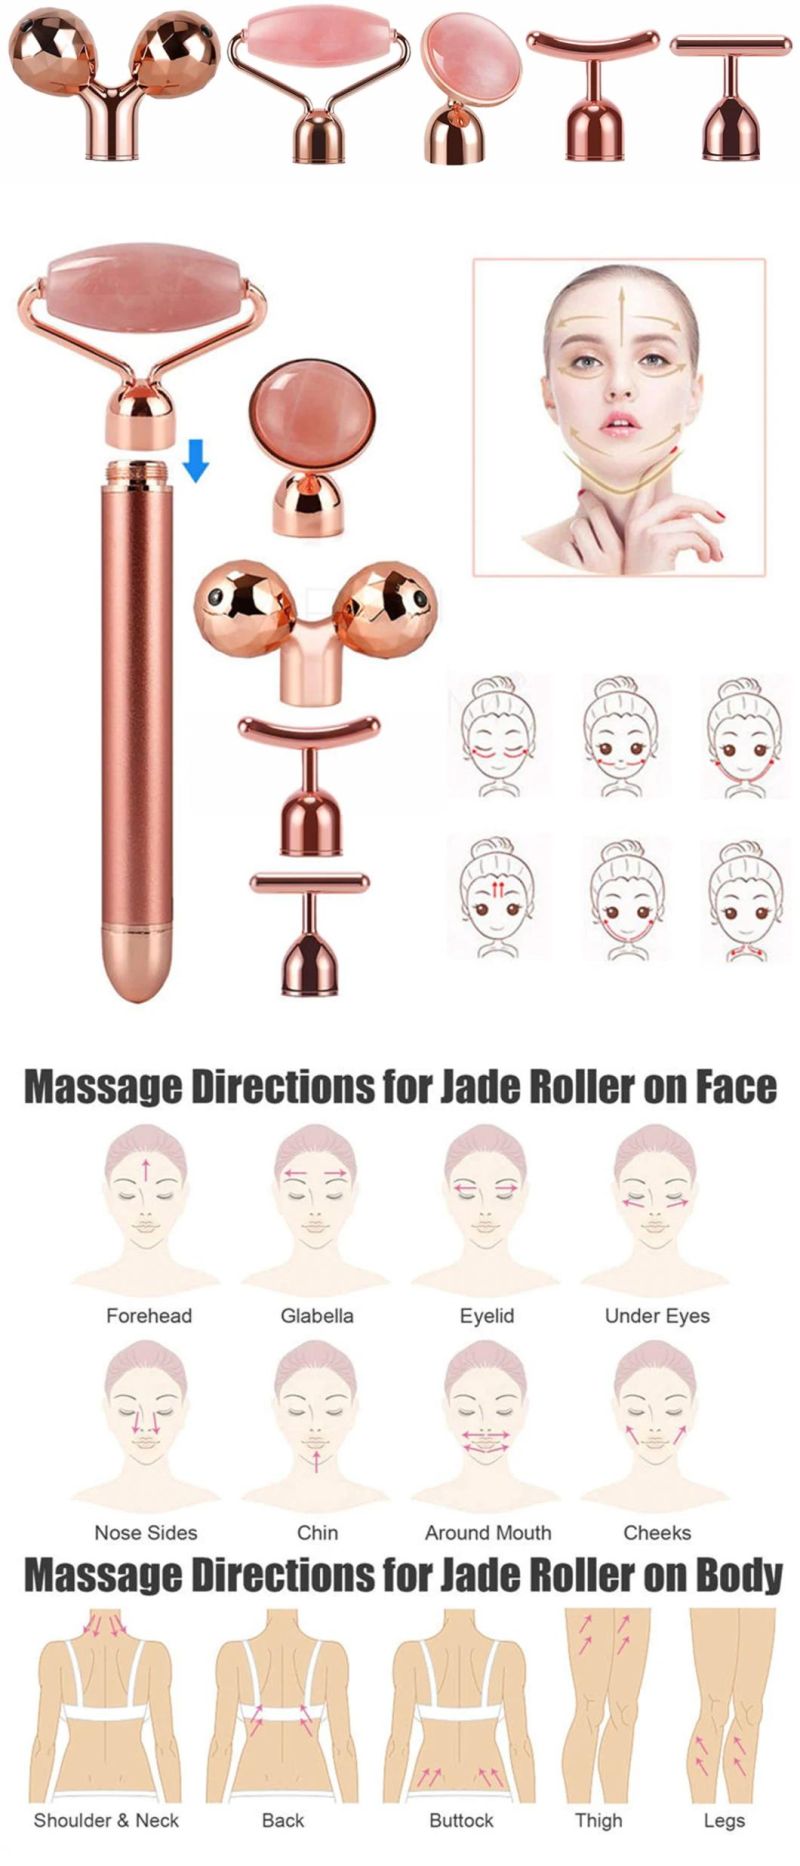 Vibrating Electronic Facial Jade Roller Massager Rose Natural Stone Qua Physio Anti Aging Therapy Jade Roller